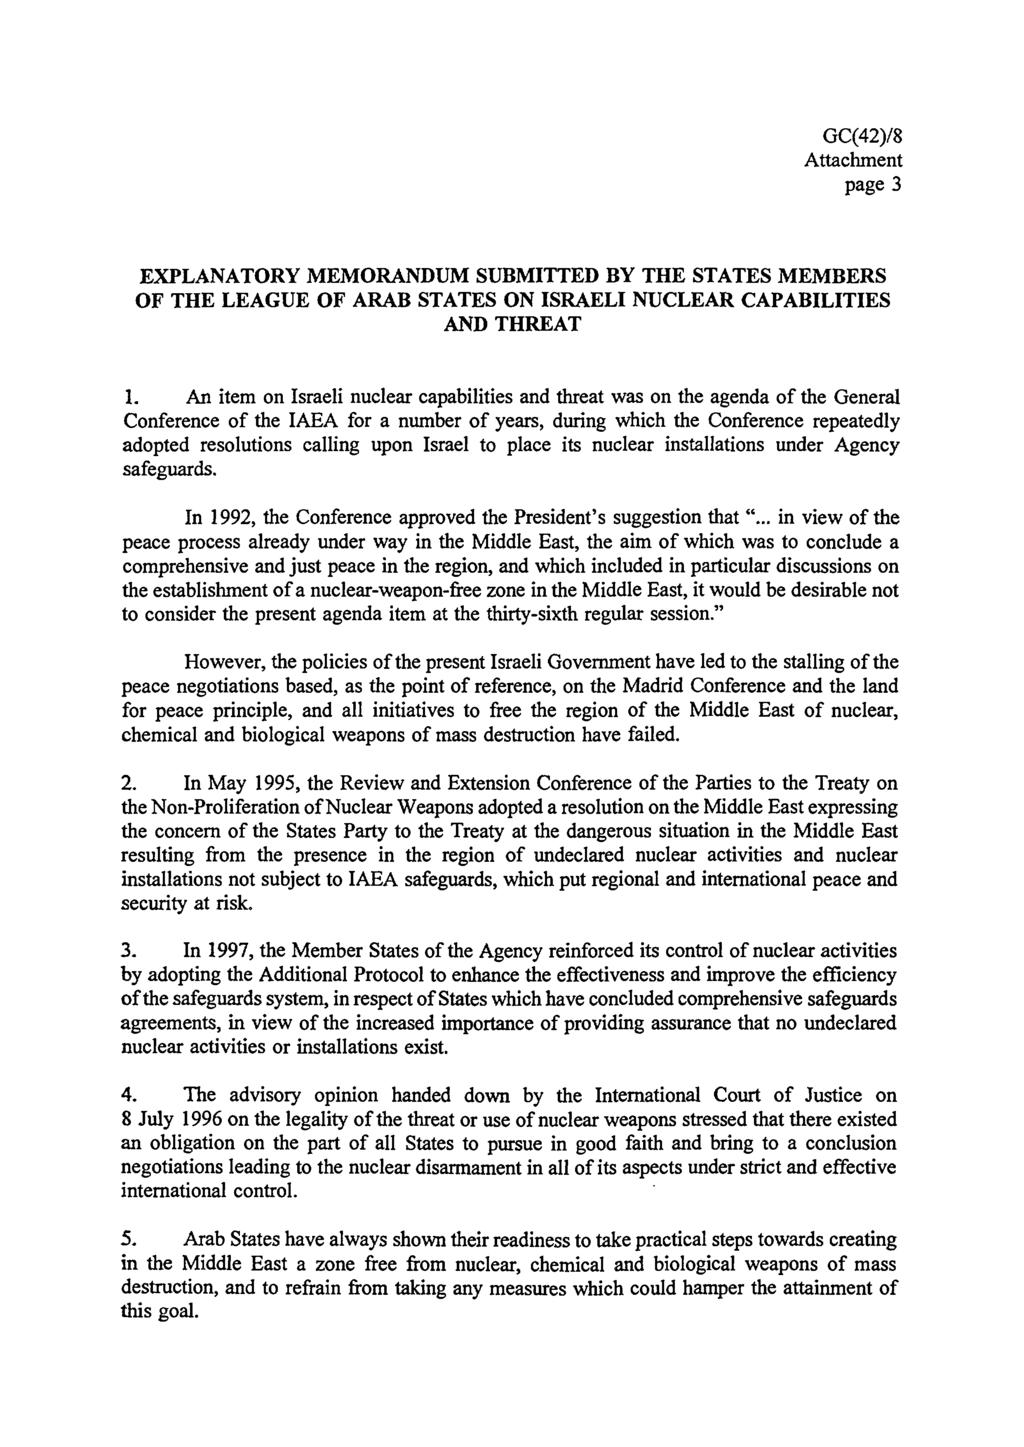 page 3 EXPLANATORY MEMORANDUM SUBMITTED BY THE STATES MEMBERS OF THE LEAGUE OF ARAB STATES ON ISRAELI NUCLEAR CAPABILITIES AND THREAT 1.